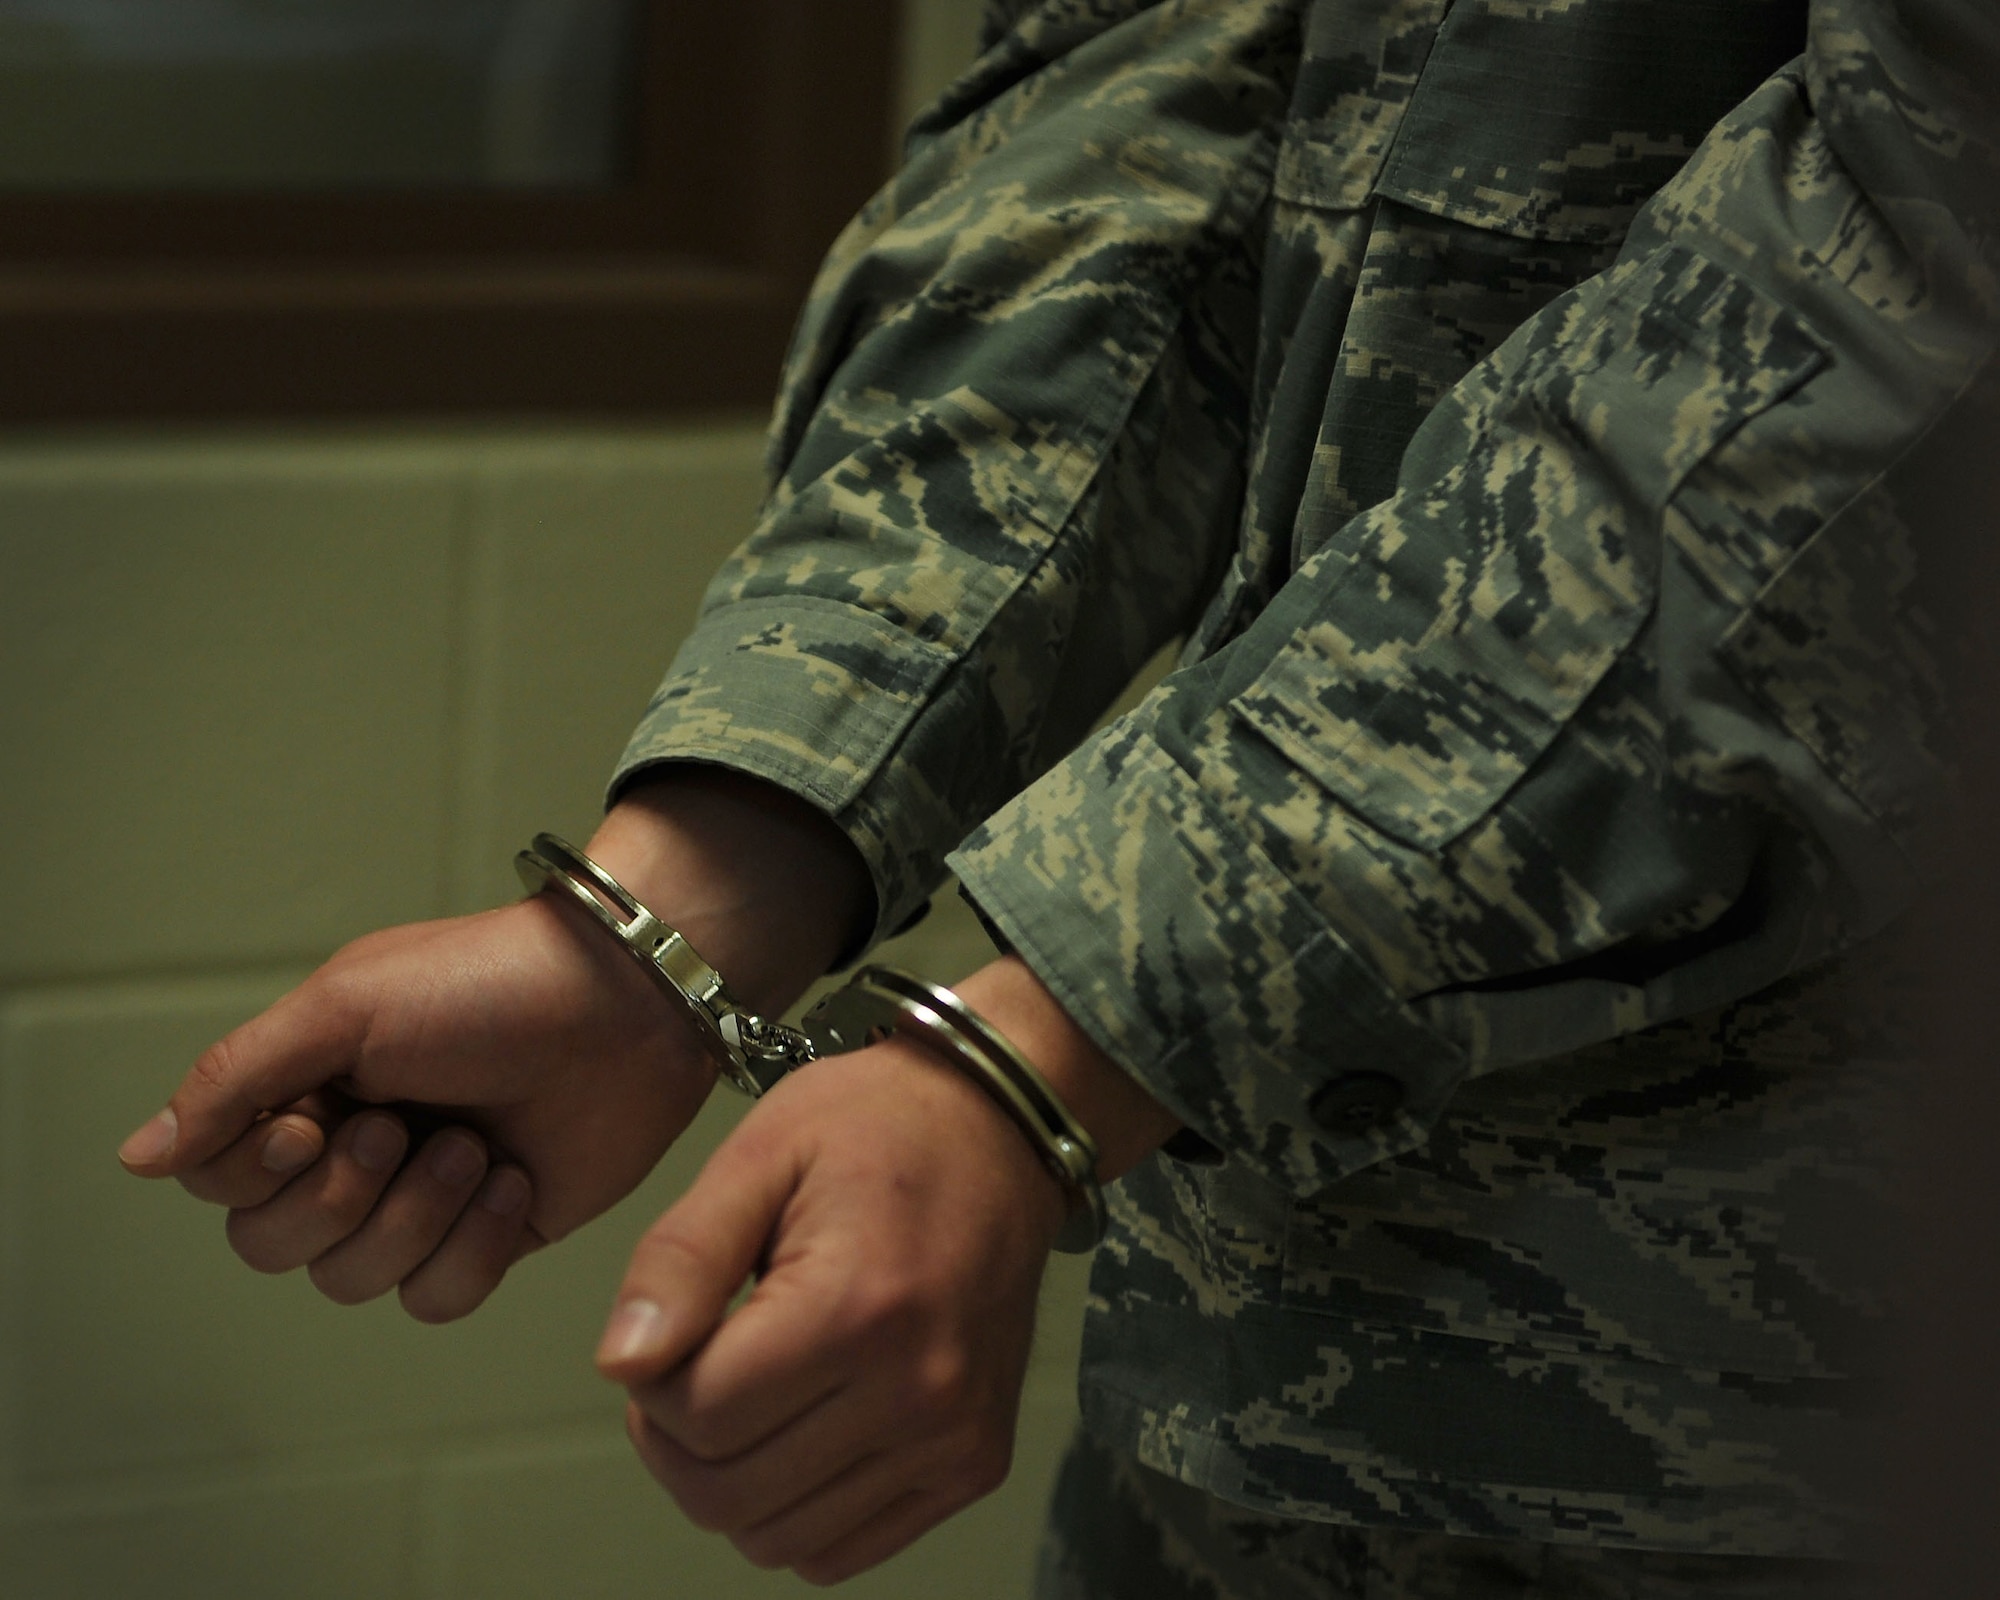 A simulated inmate stands with his hands cuffed, reciting the rules of confinement April 13, 2016 at the 27th Special Operations Security Forces Squadron compound at Cannon Air Force Base, N.M. In addition to reading the rules aloud for the confinement NCO in-charge to hear, inmates are given a rulebook and a test to ensure they understand expectations and may be held accountable for infractions. (U.S. Air Force photo/Staff Sgt. Whitney Amstutz)